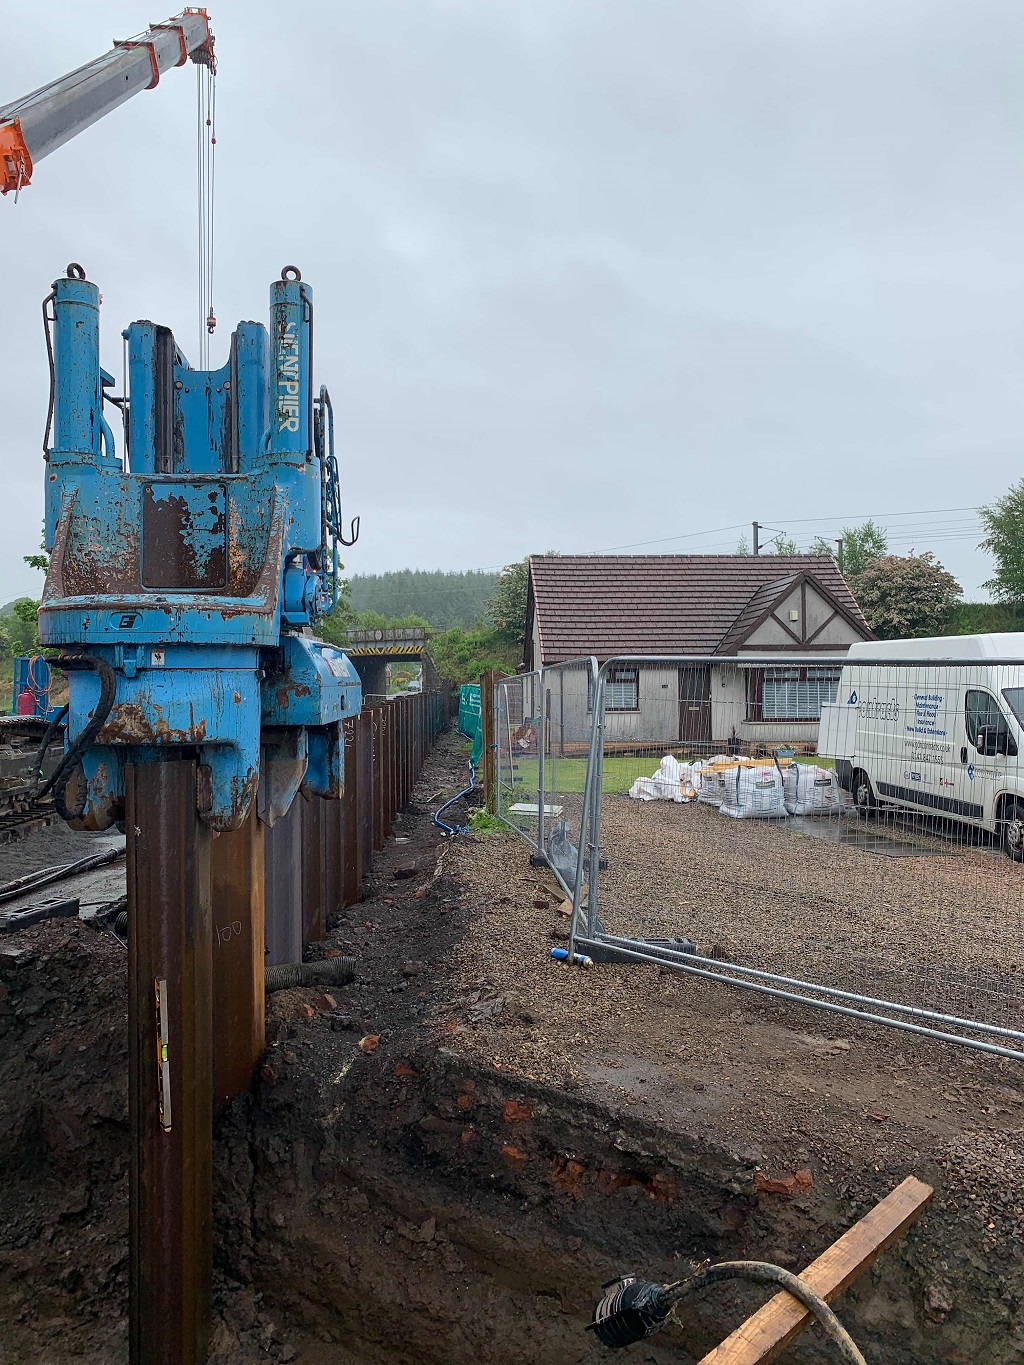 Sheet Piling UK awarded contract to assist North Ayrshire flood defences 